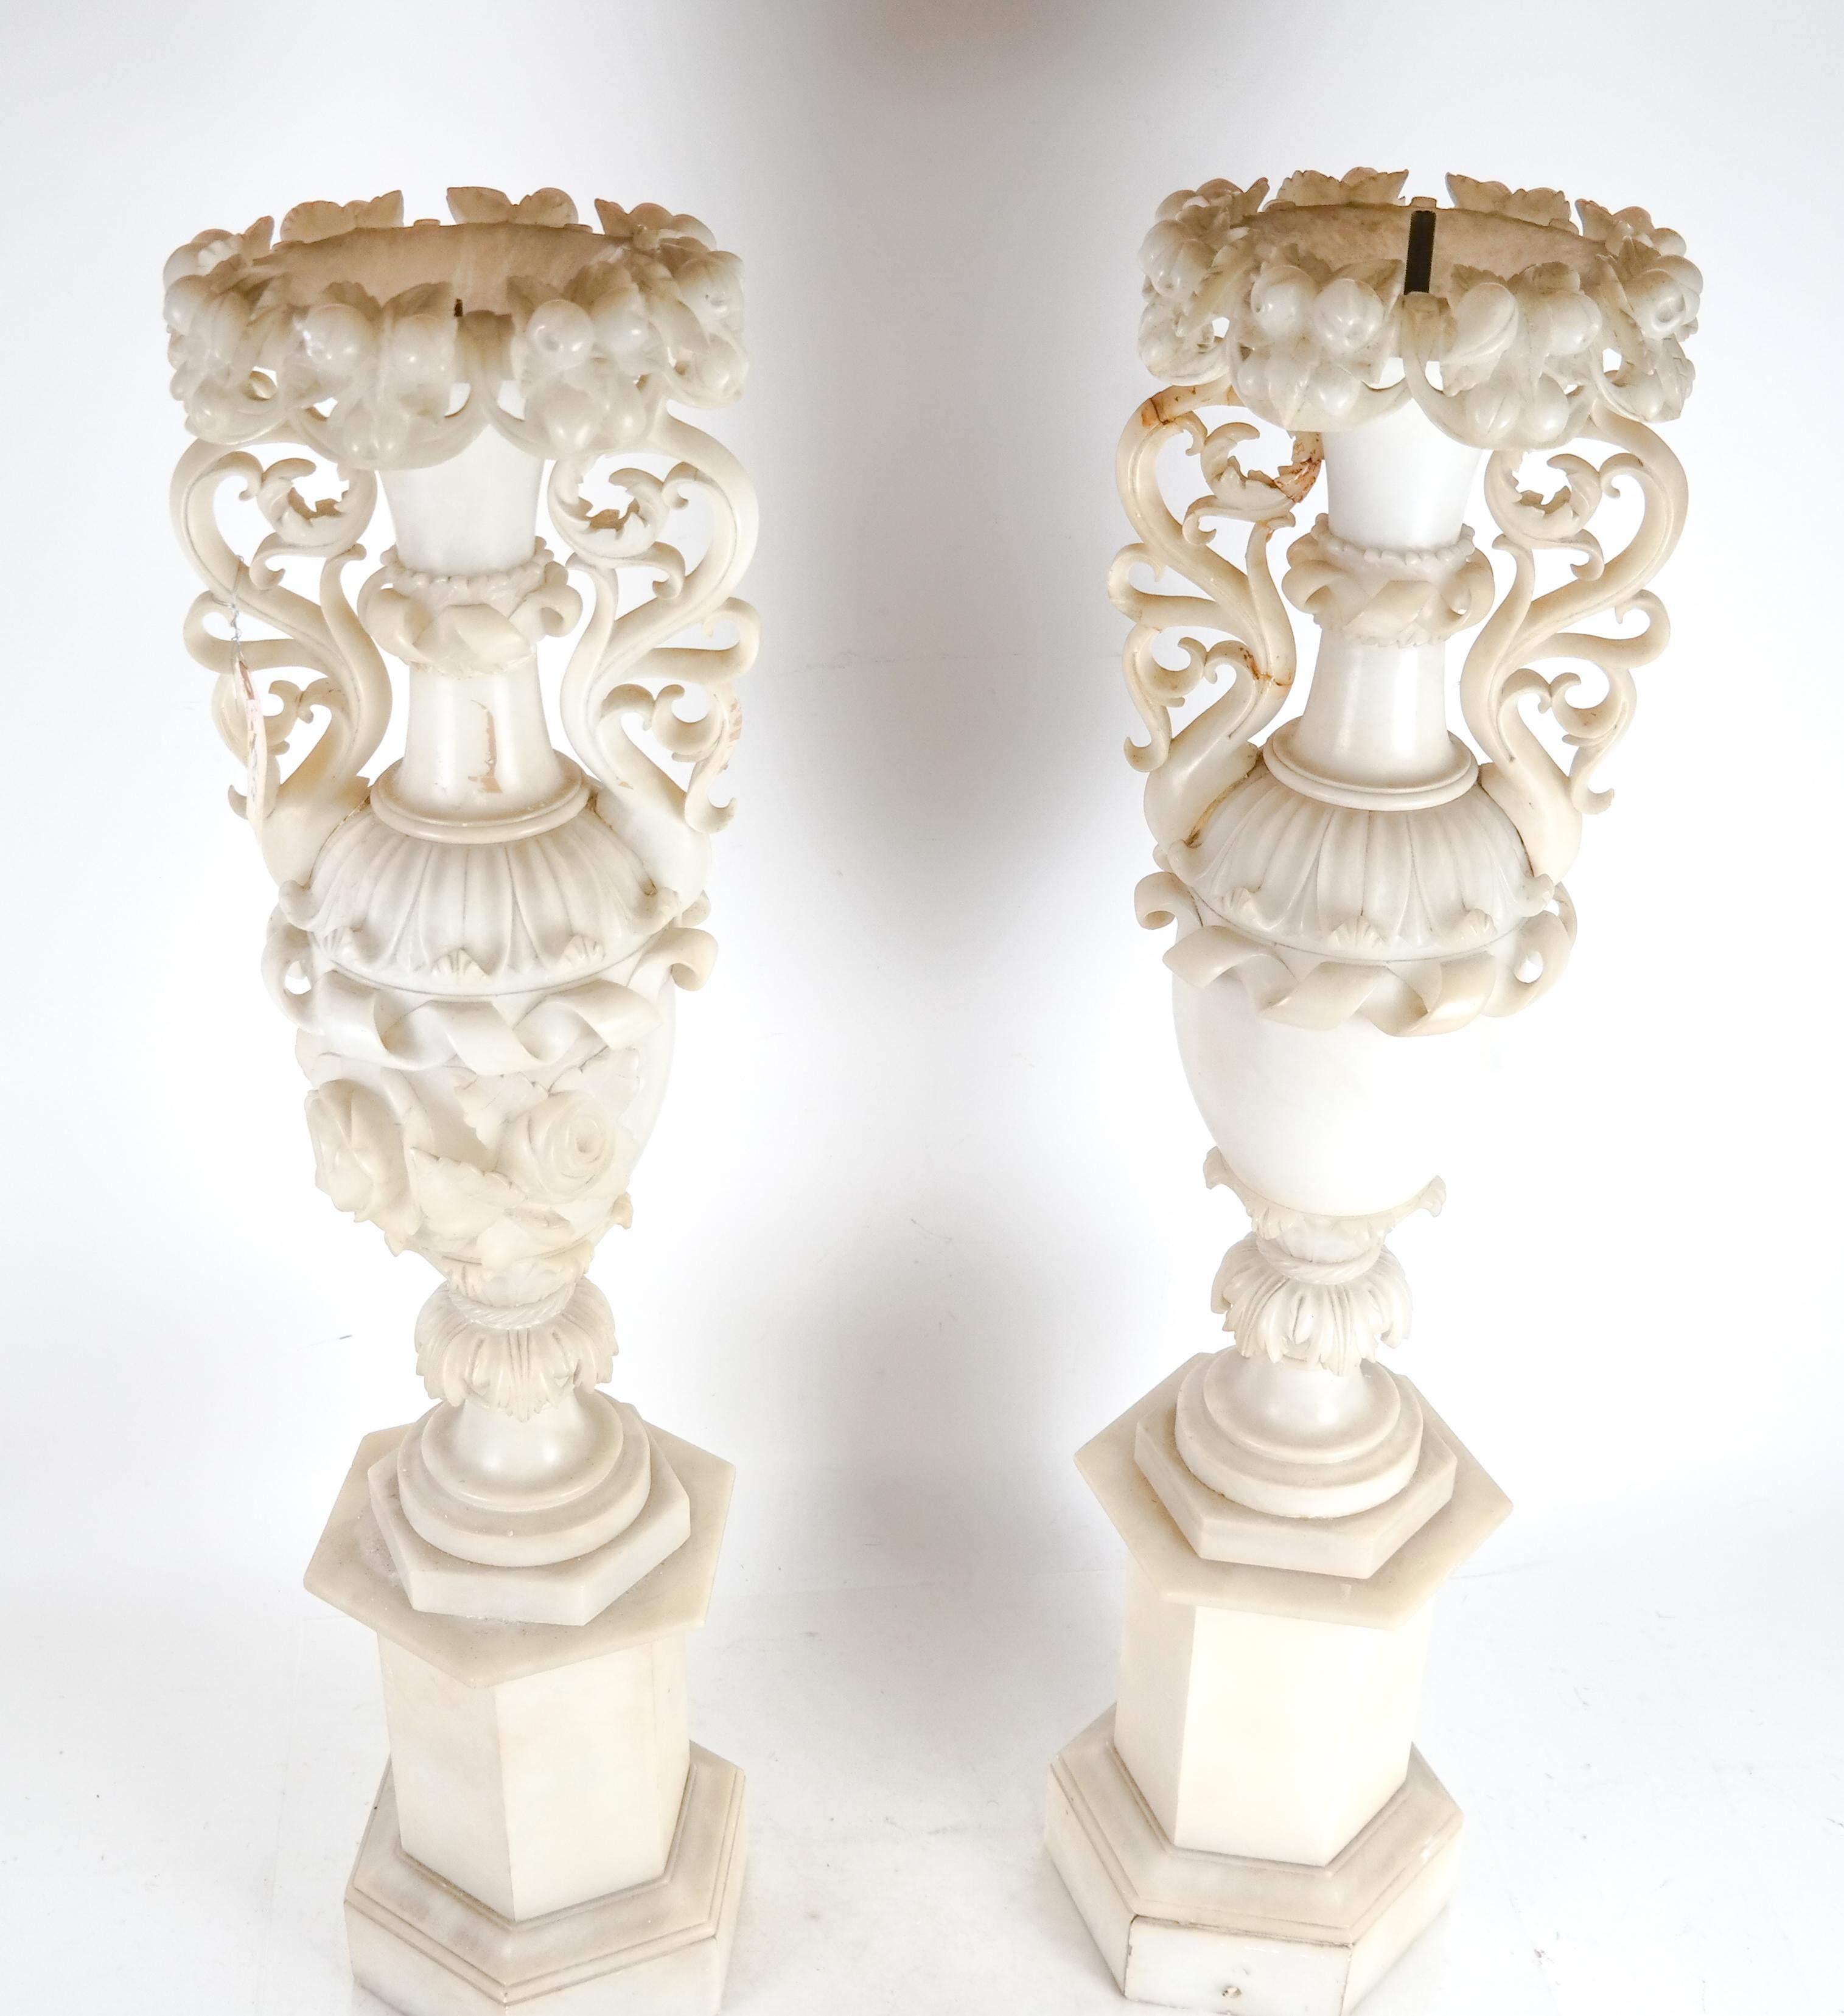 Pair of monumental Italian 19 century Alabaster vases converted to lamps with wonderful carving of flowers and fruits. Very impressive size and great quality carving.
They can easily be converted back to vases.